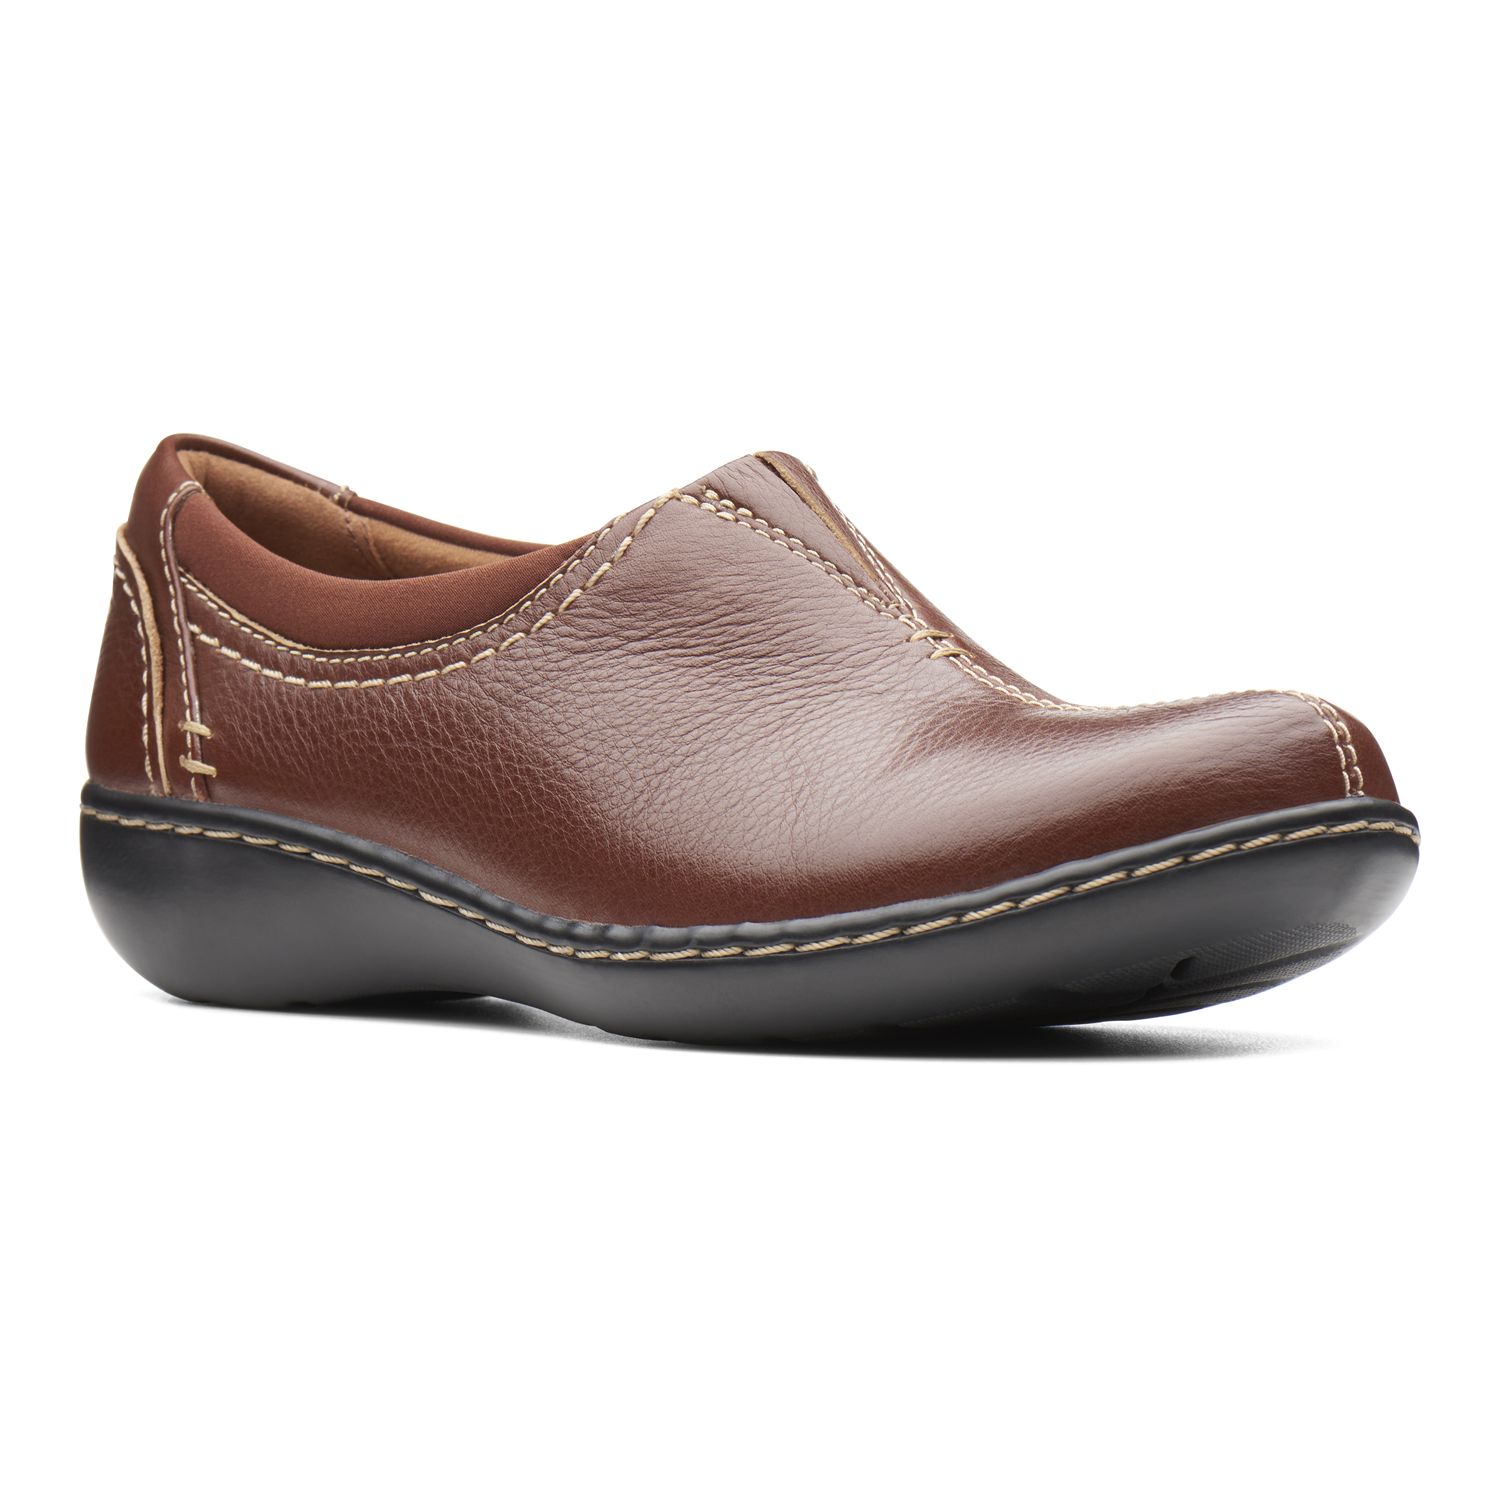 clarks wide shoes